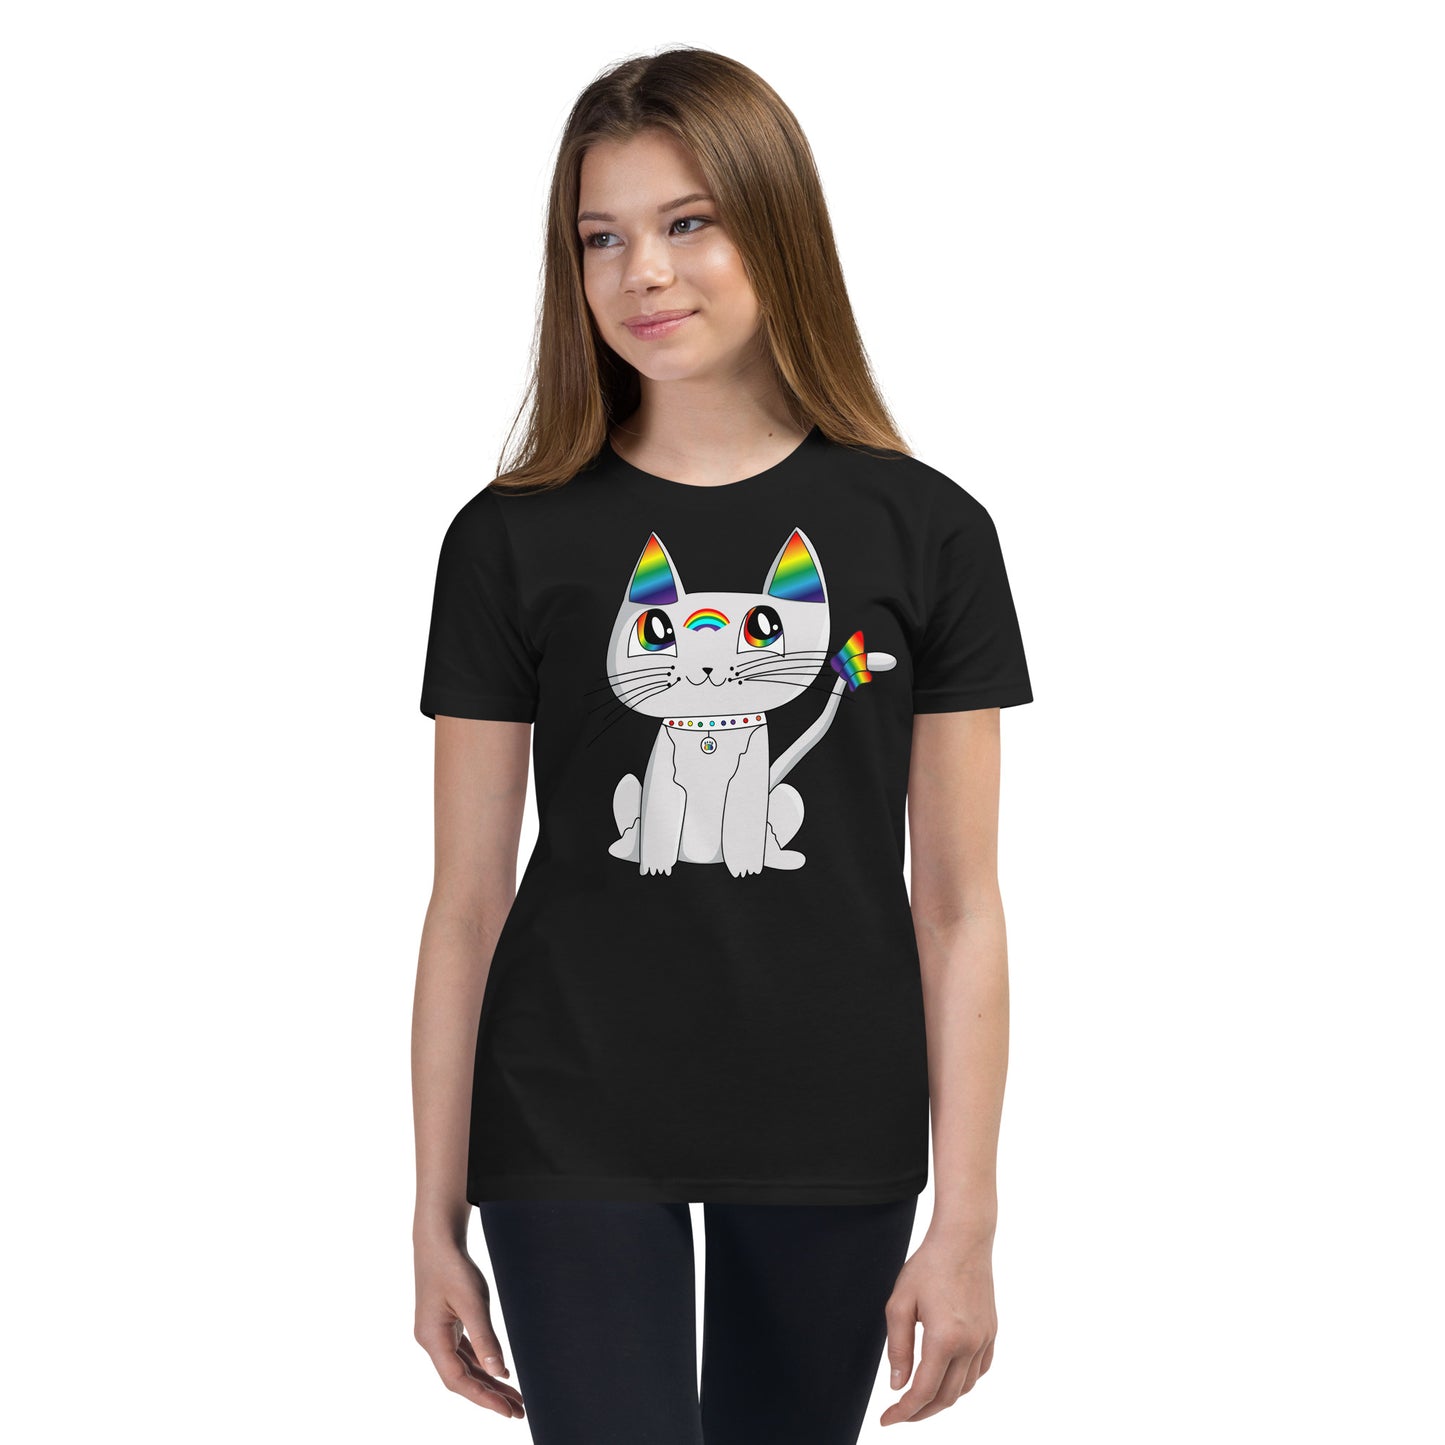 Colorful Cat - Ami's Cats Youth Short Sleeve T-Shirt